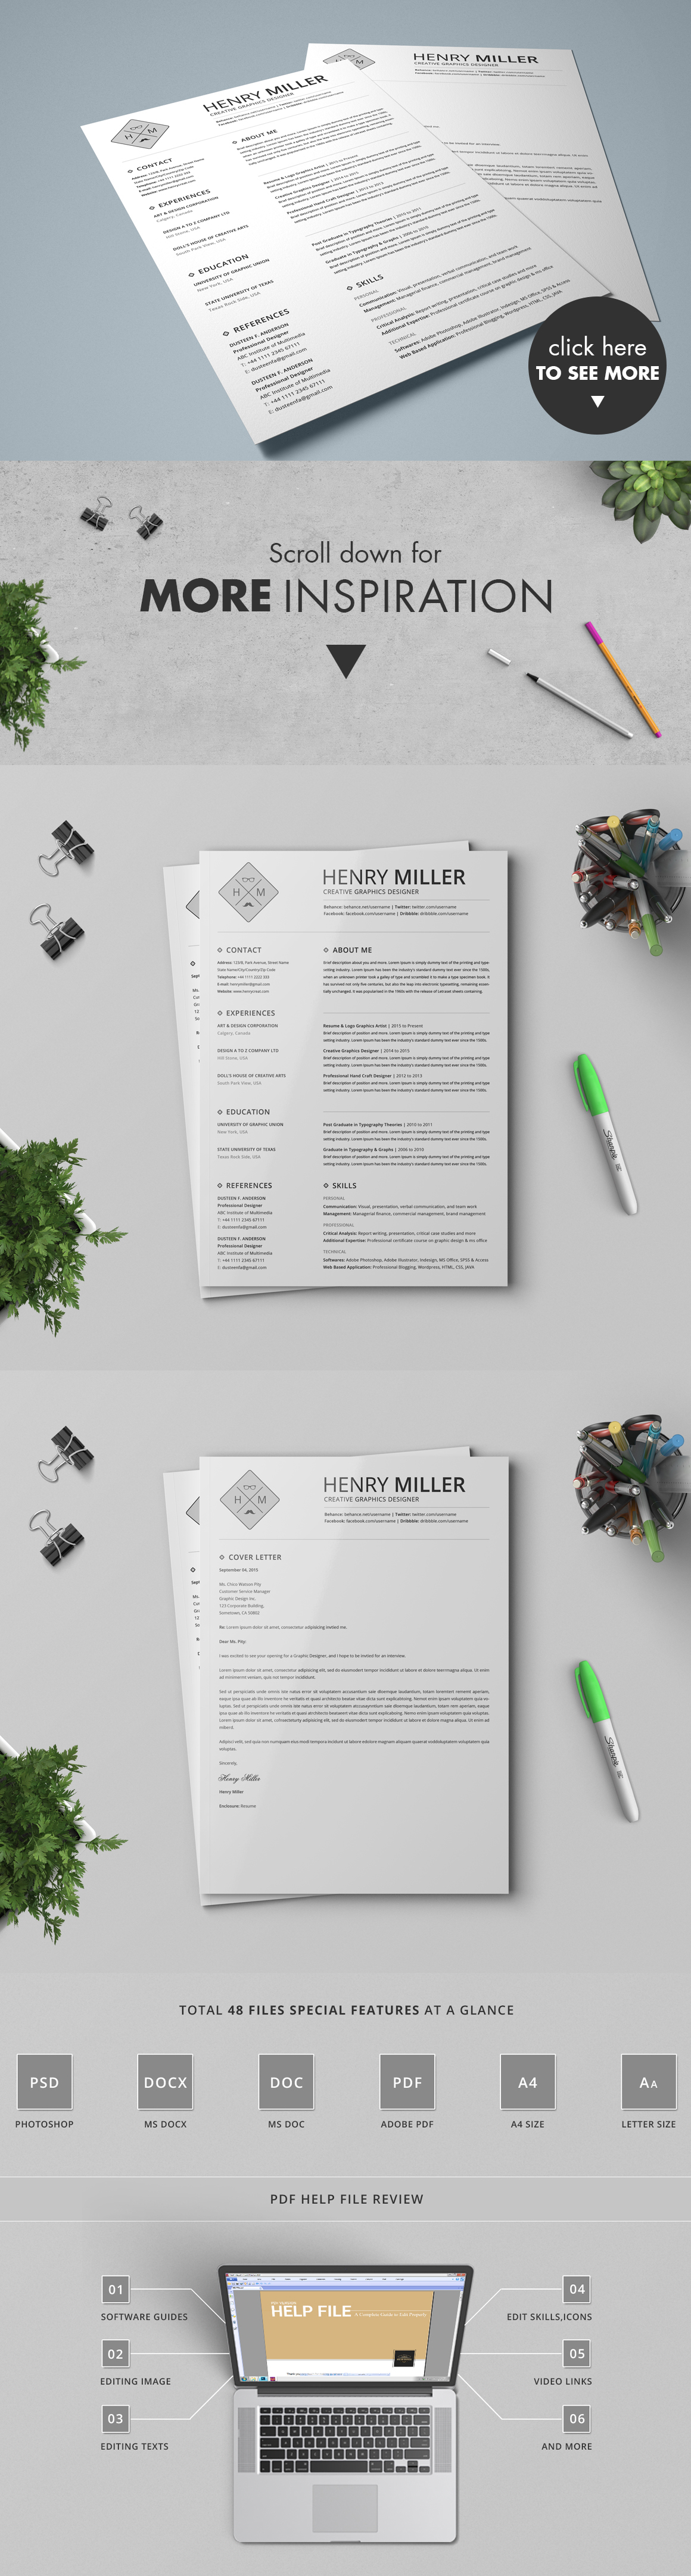 How to Edit a Resume on Pdf: A Complete Guide